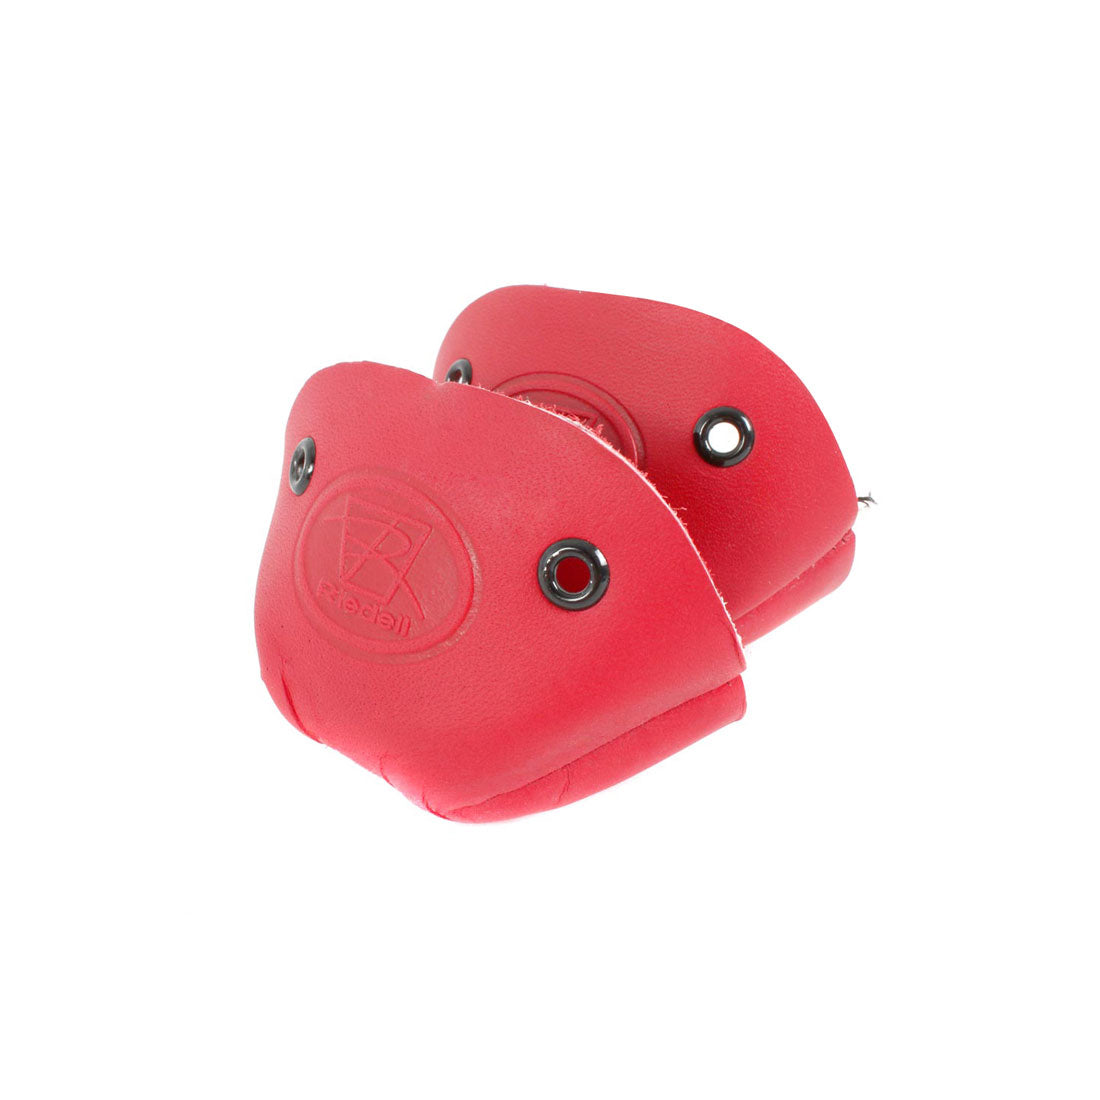 Riedell Toe Cap 2pk - Leather Red Roller Skate Hardware and Parts